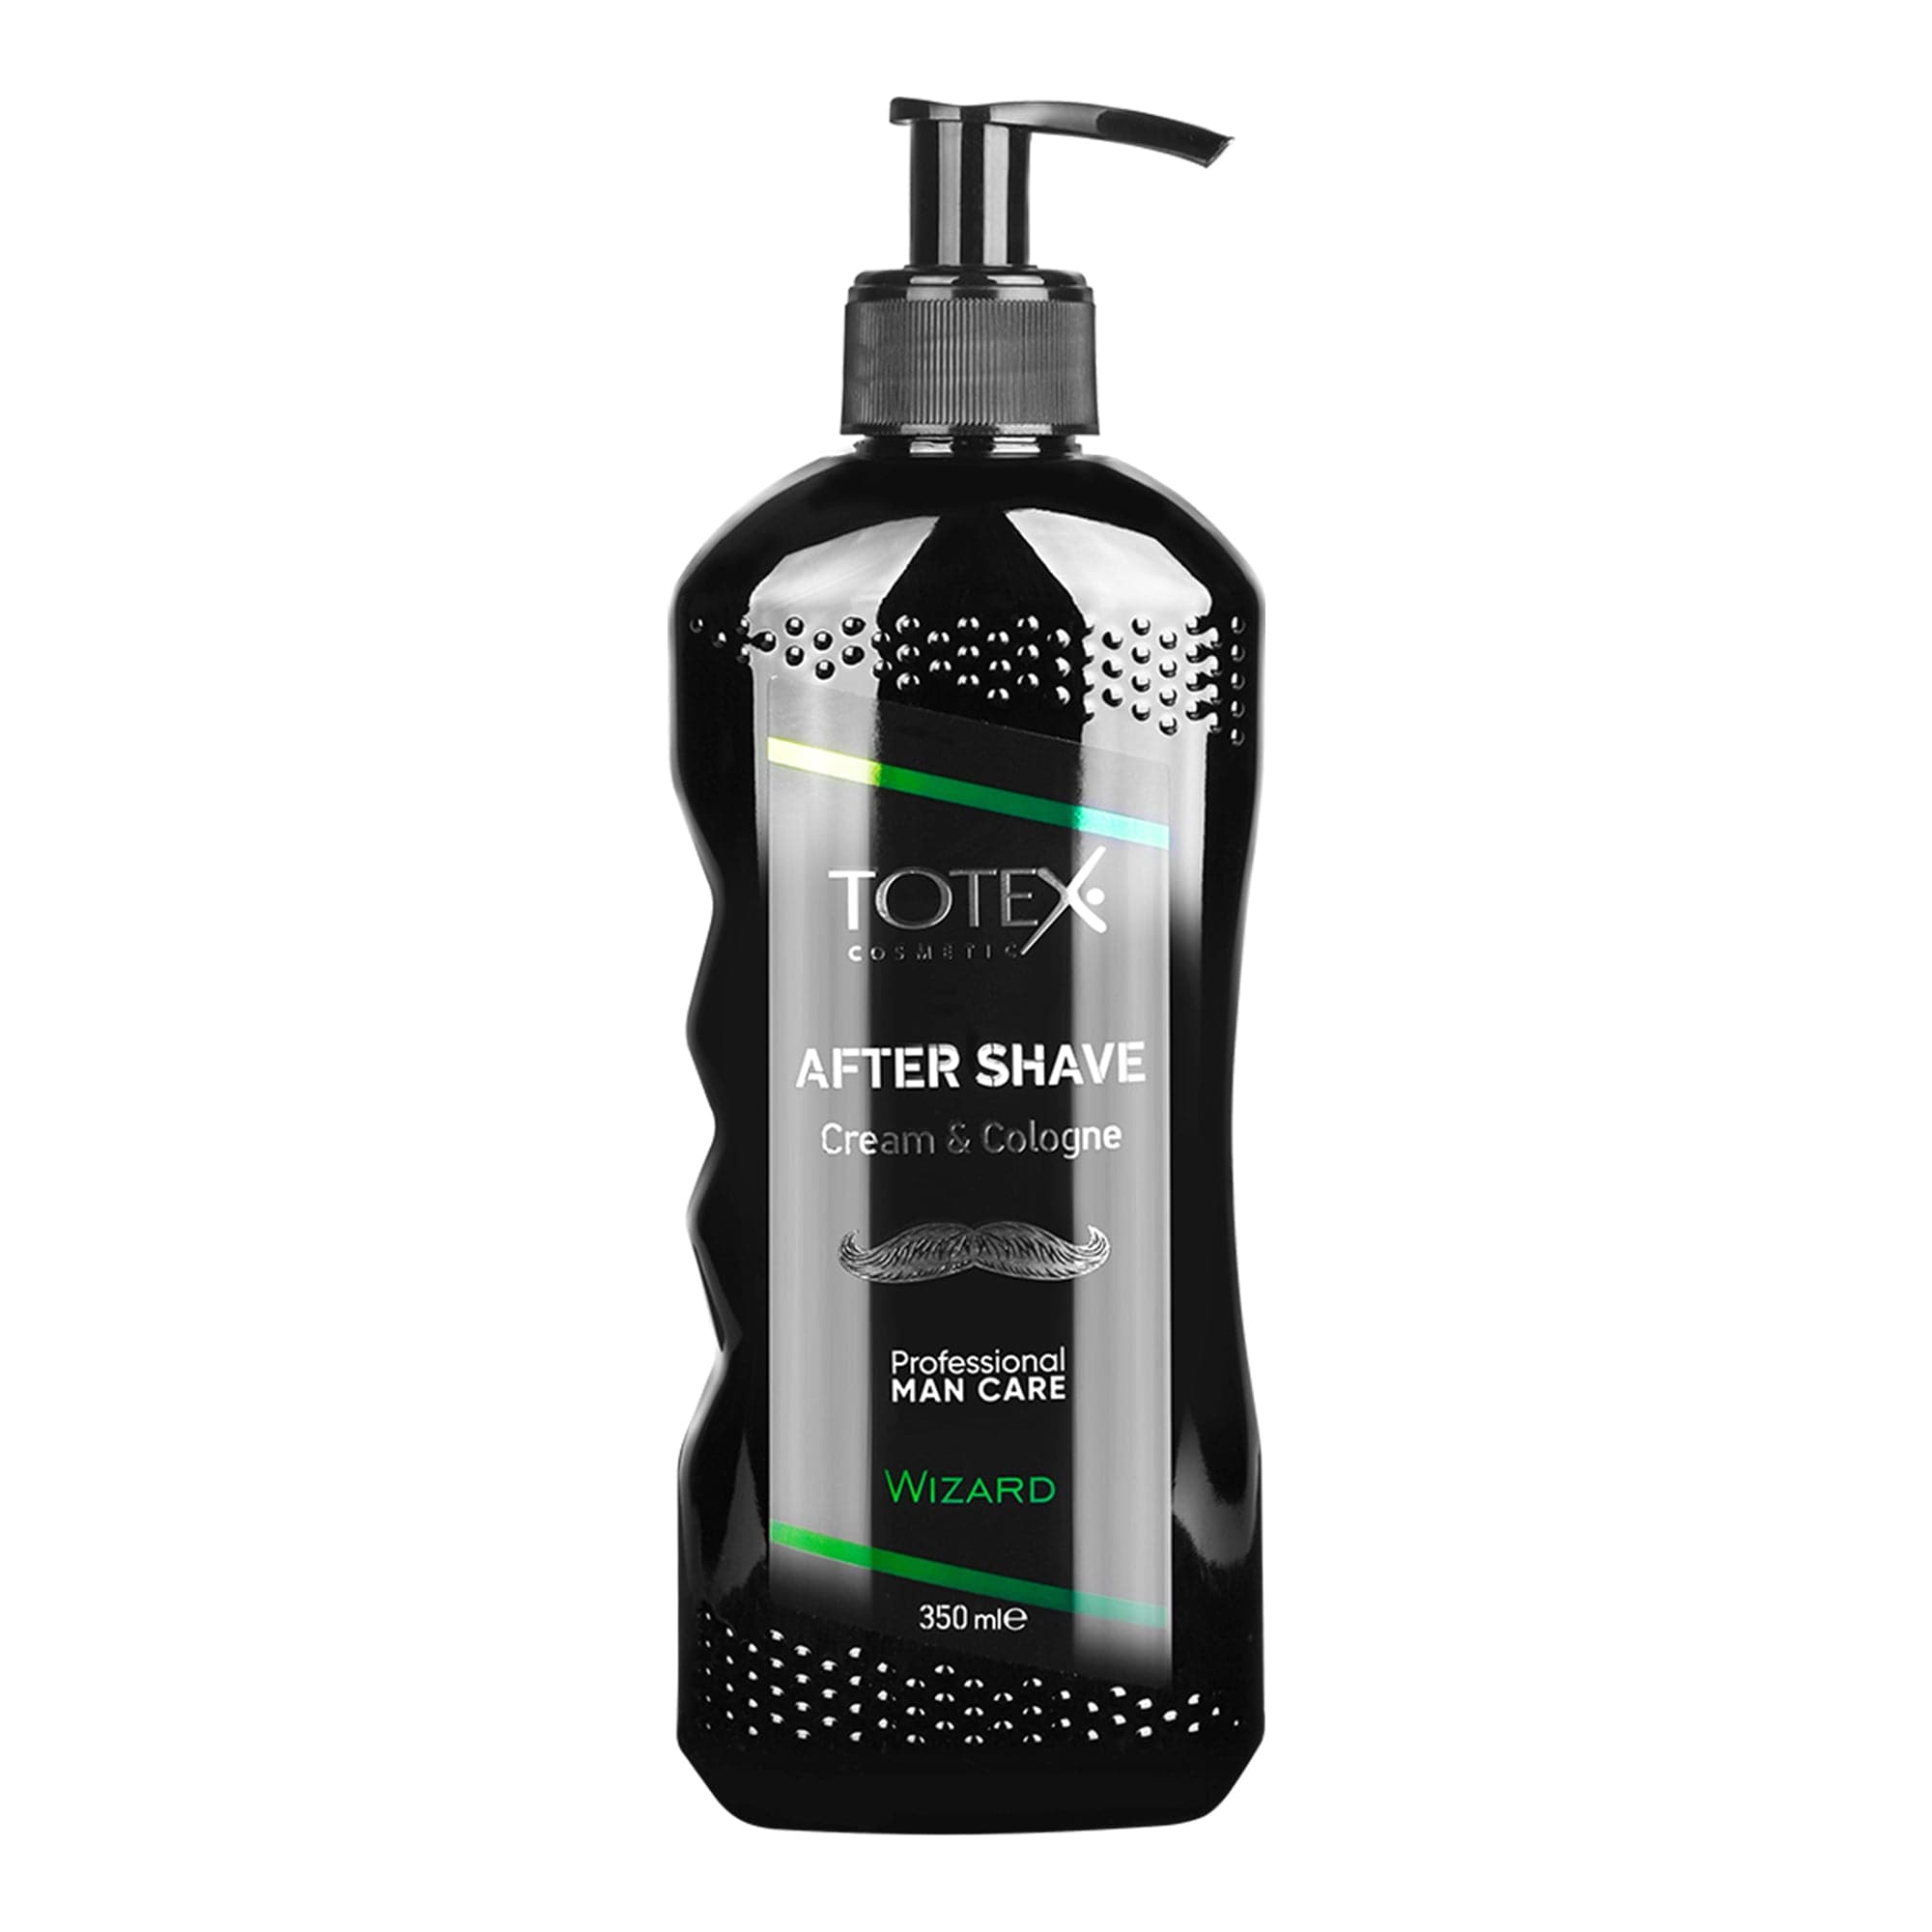 Totex - After Shave Cream & Cologne Wizard 350ml